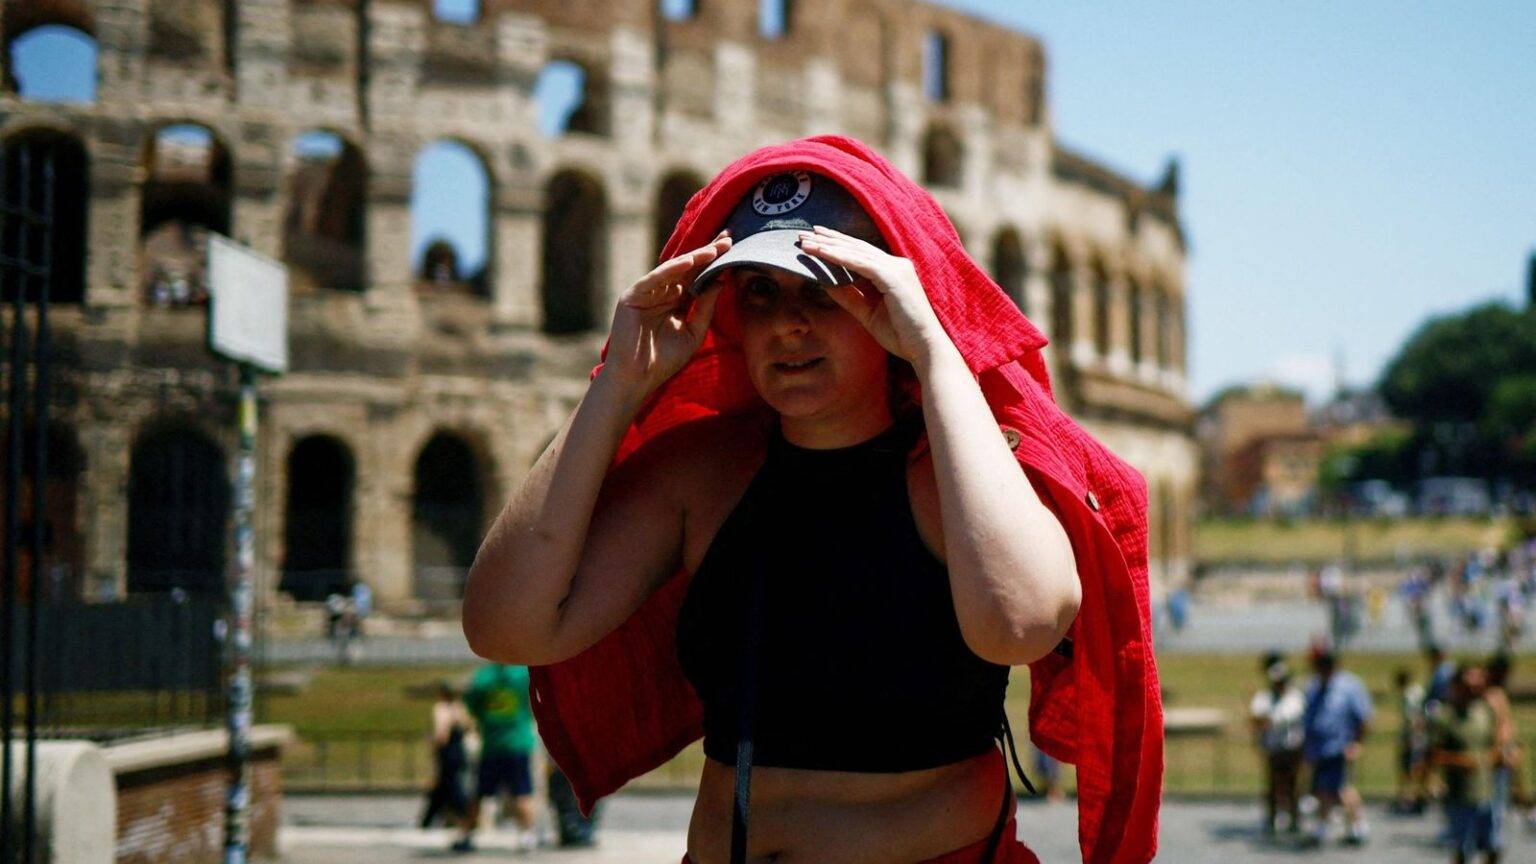 Cerberus heatwave: Deadly hot weather sweeps across Southern Europe